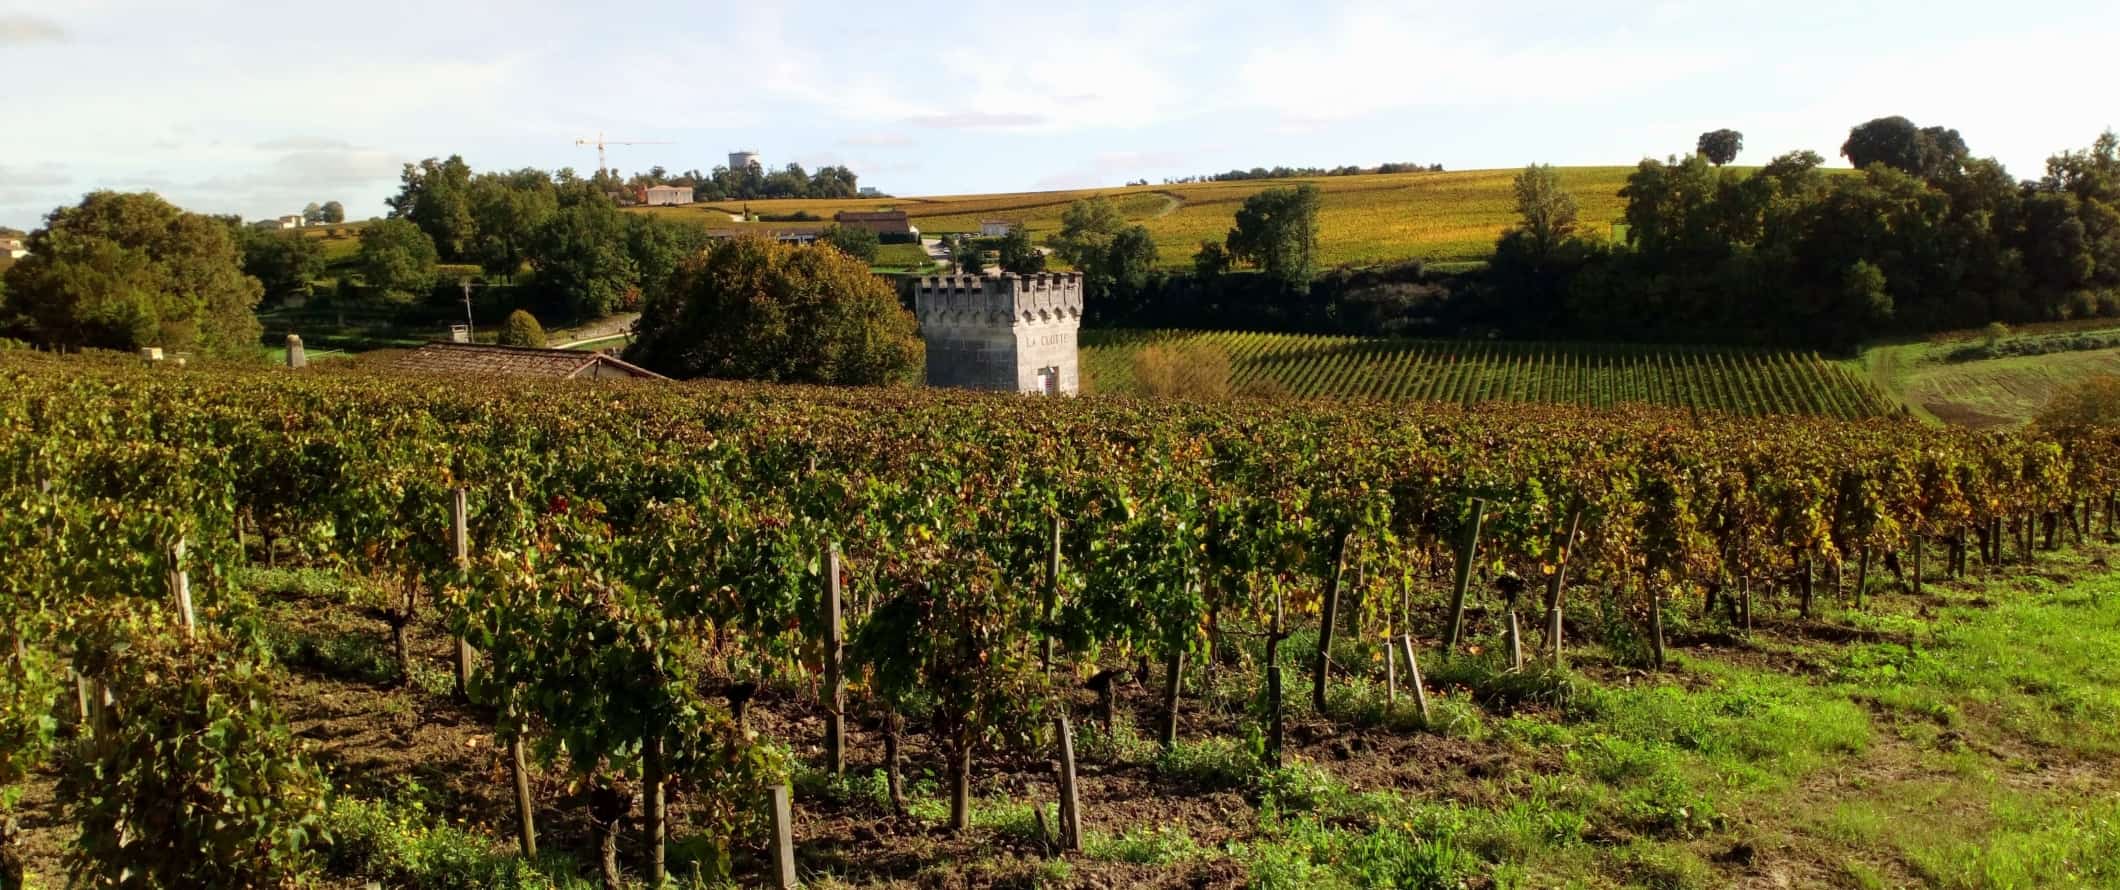 A vineyard, small historic castle tower, and rolling hills in Saint Emilion, France